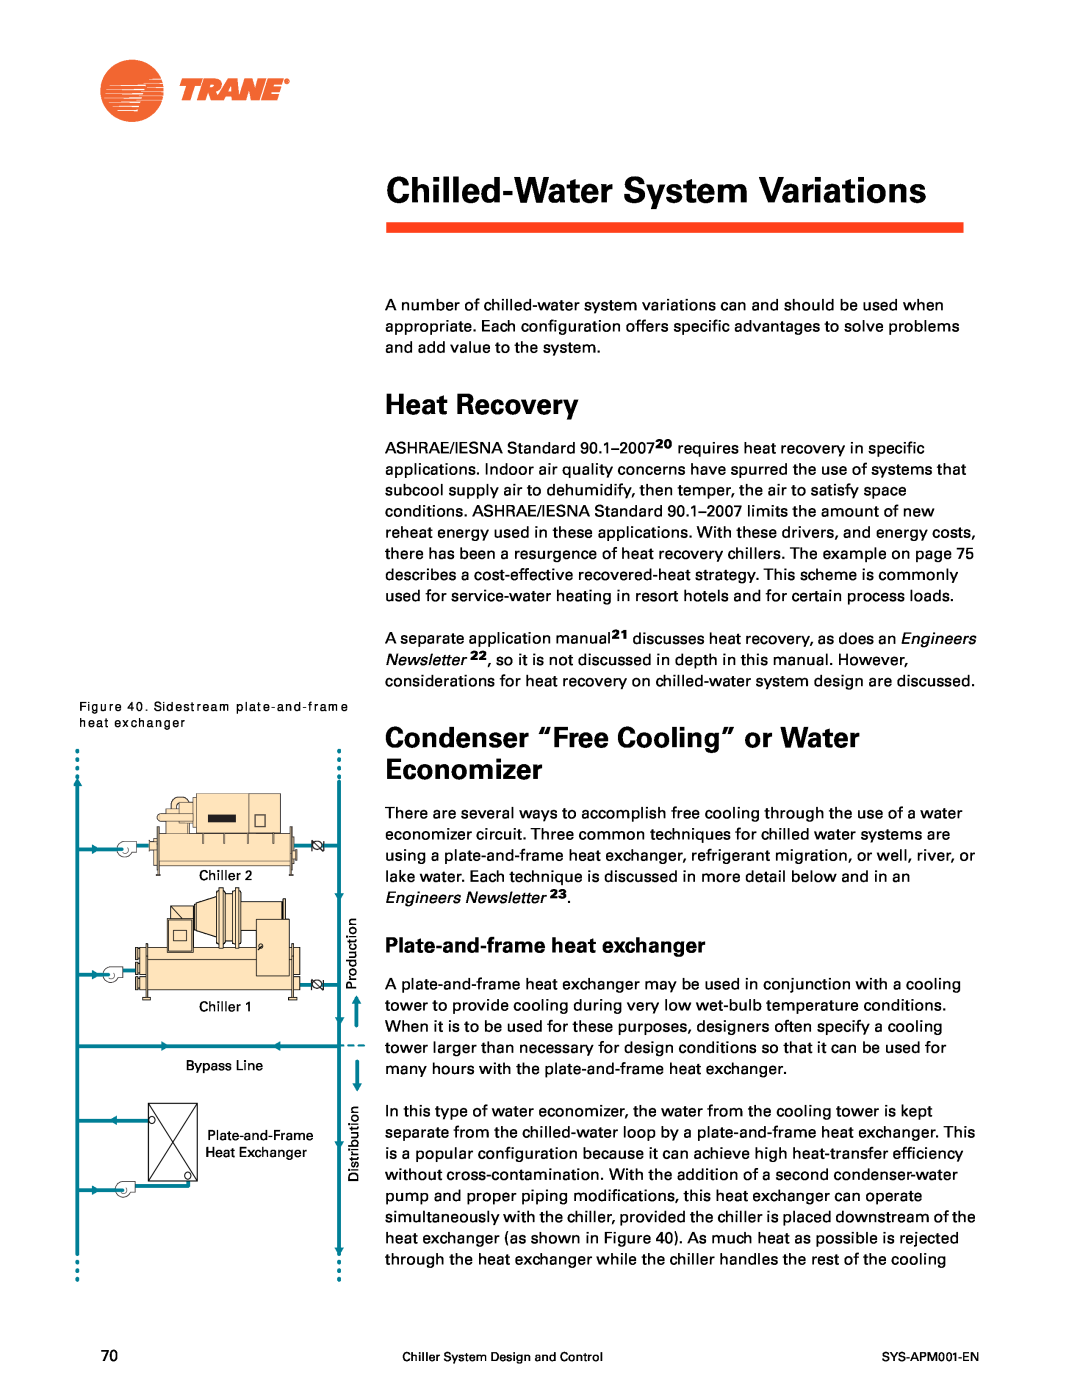 Trane SYS-APM001-EN manual Chilled-Water System Variations, Heat Recovery, Condenser “Free Cooling” or Water Economizer 